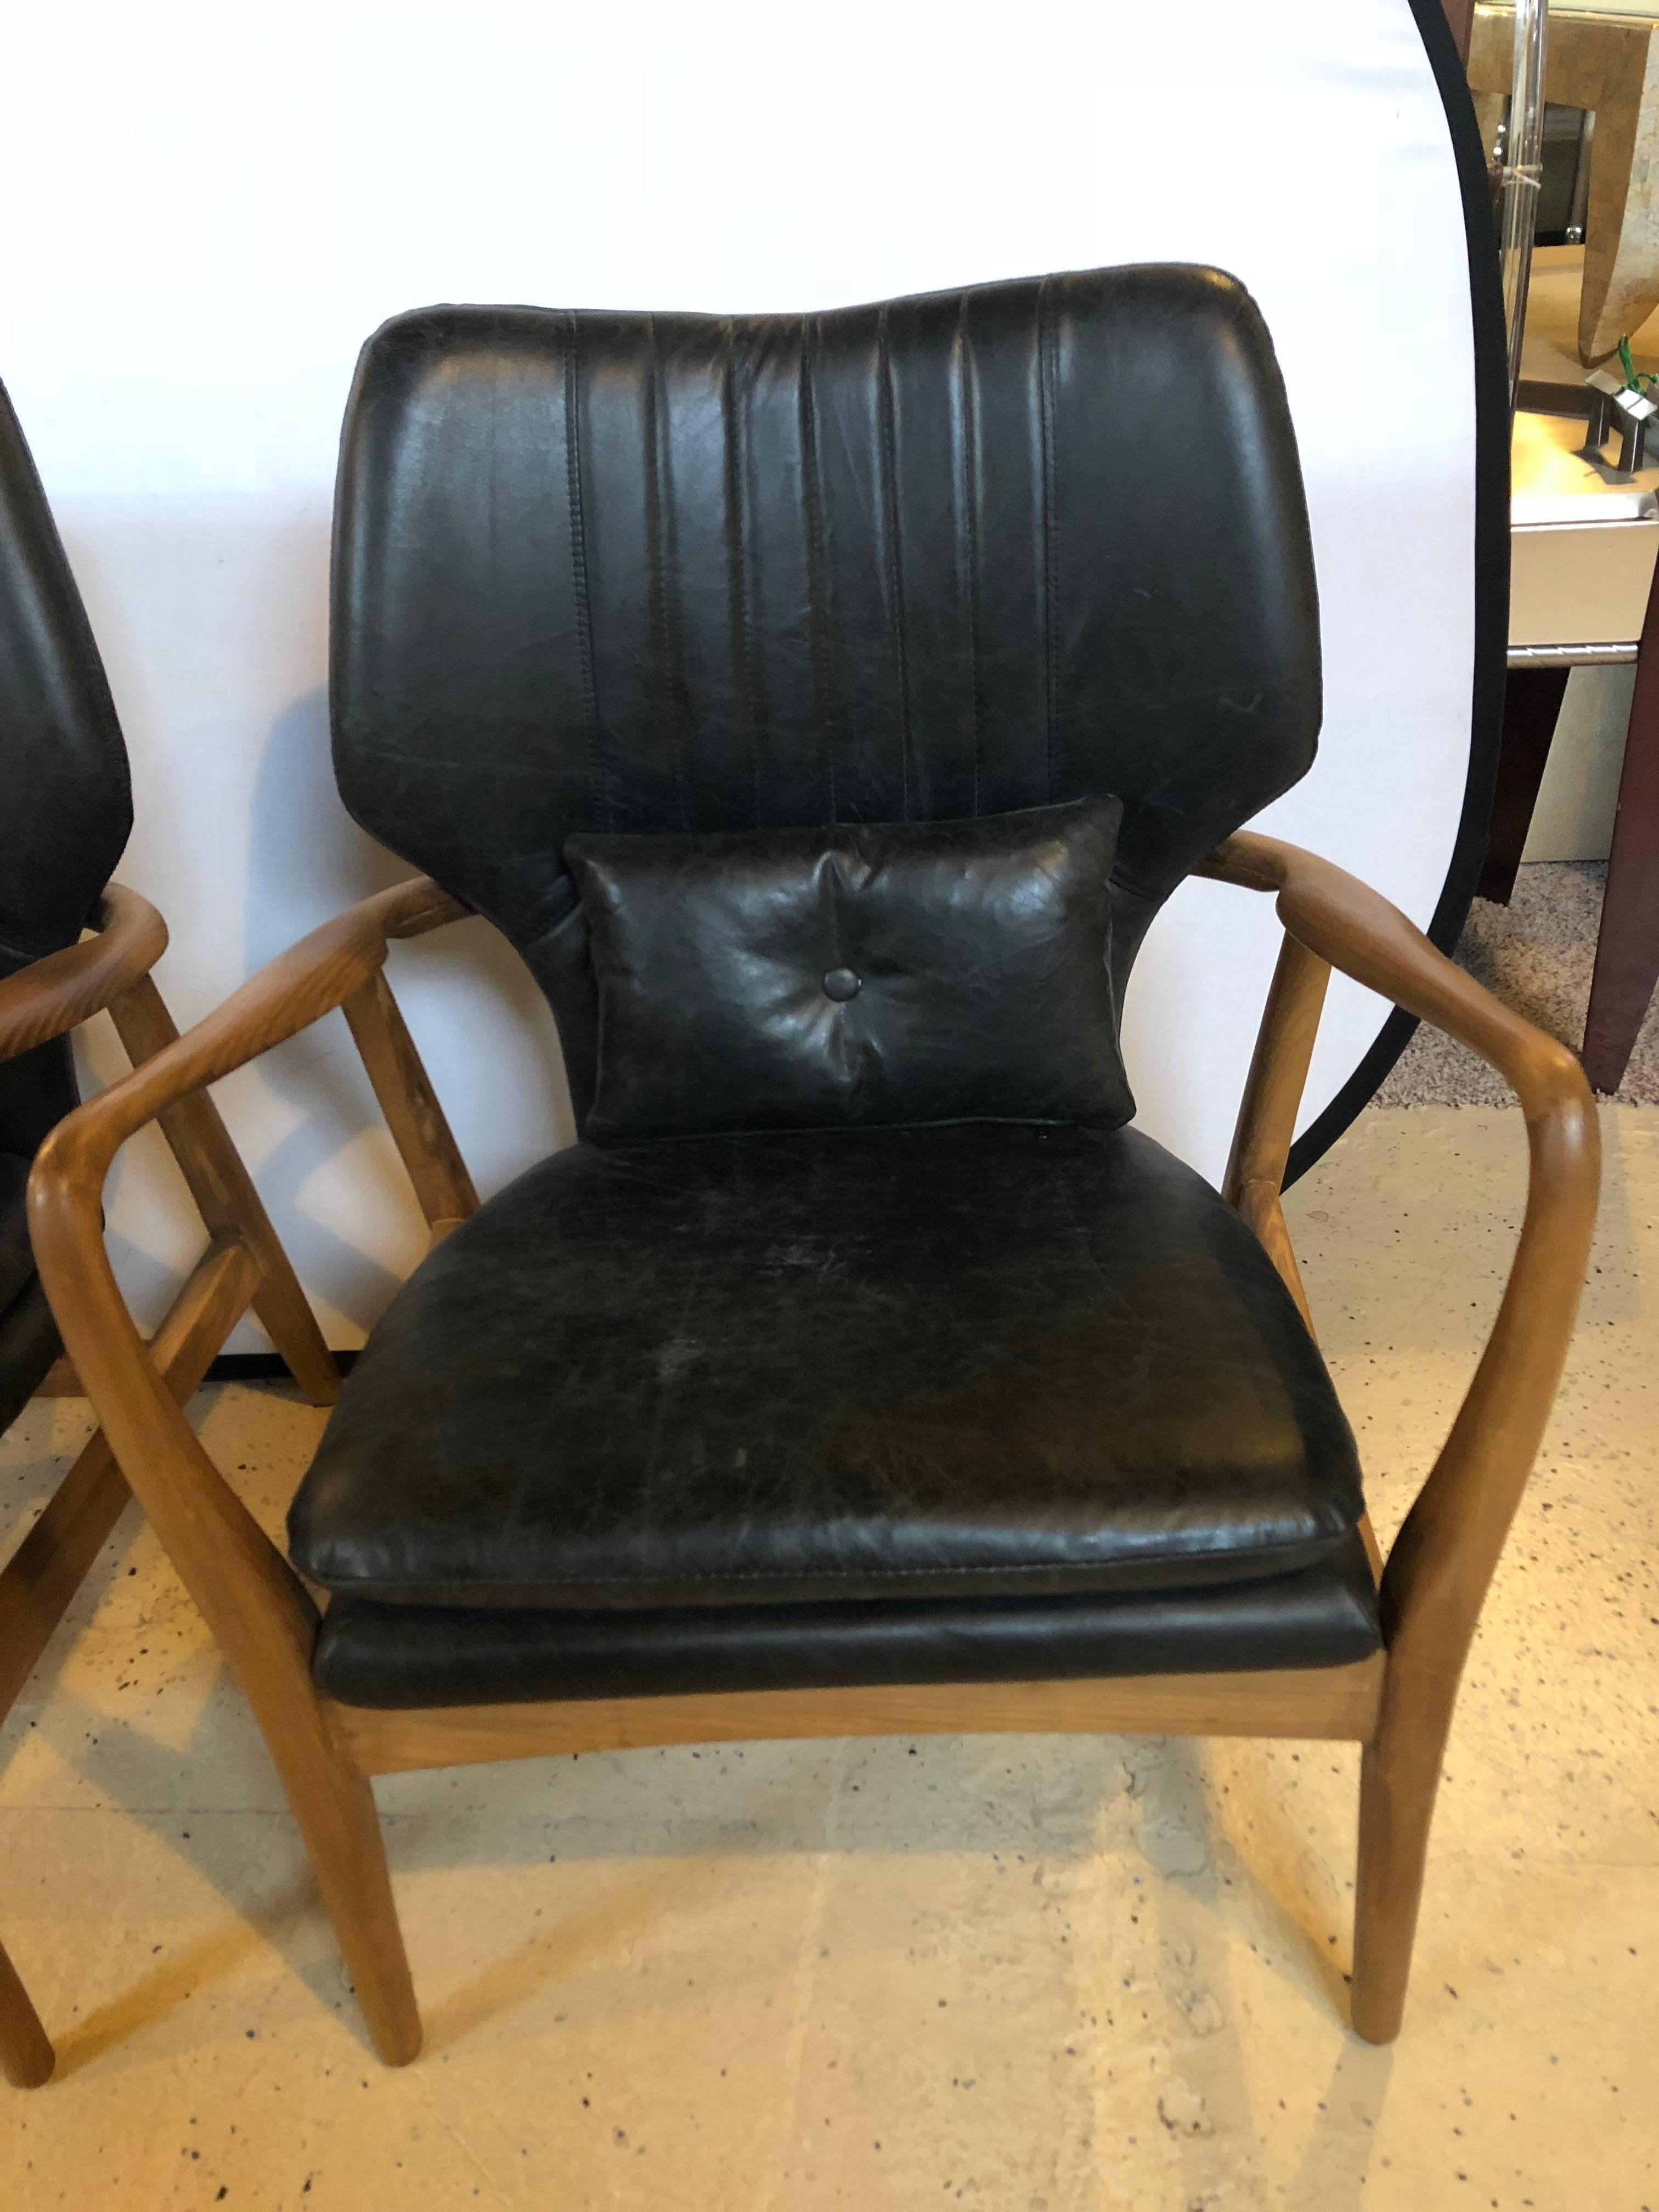 Pair of Mid-Century Modern style arm chairs with black leather upholstery. Strong and sturdy with sleek and simple lines come this finely constructed pair of arm or lounge chairs with cushion bottoms and small lower back pillows.